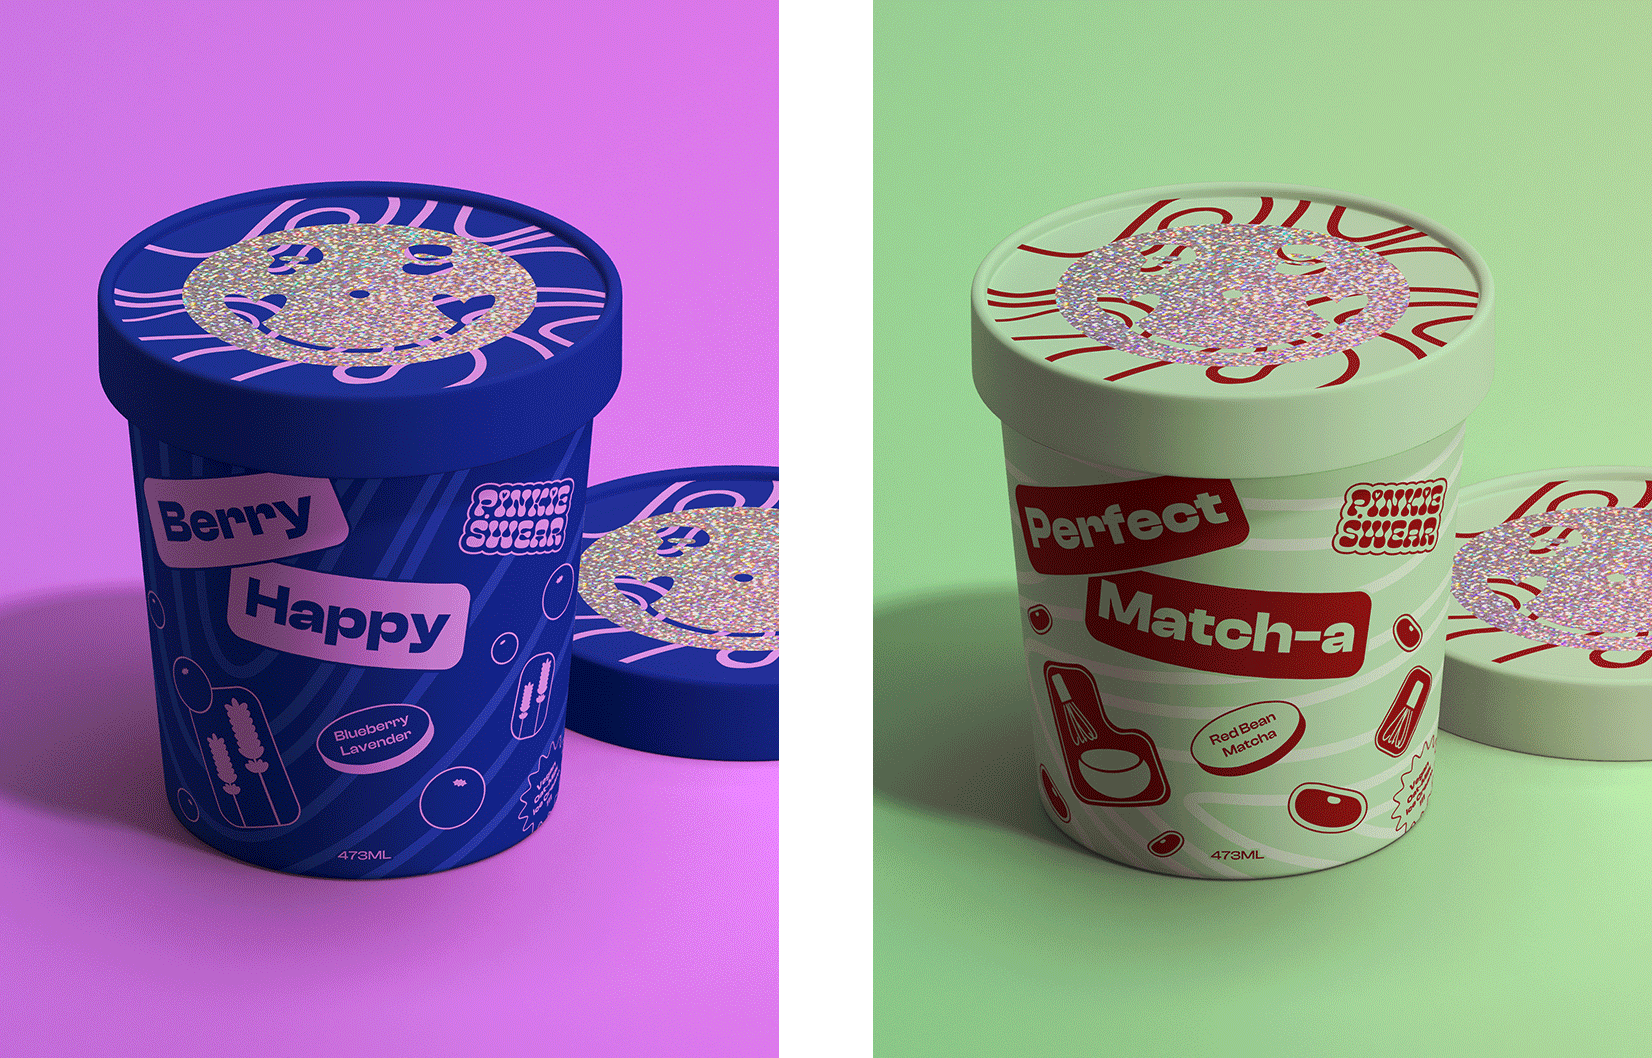 Two containers of ice cream.